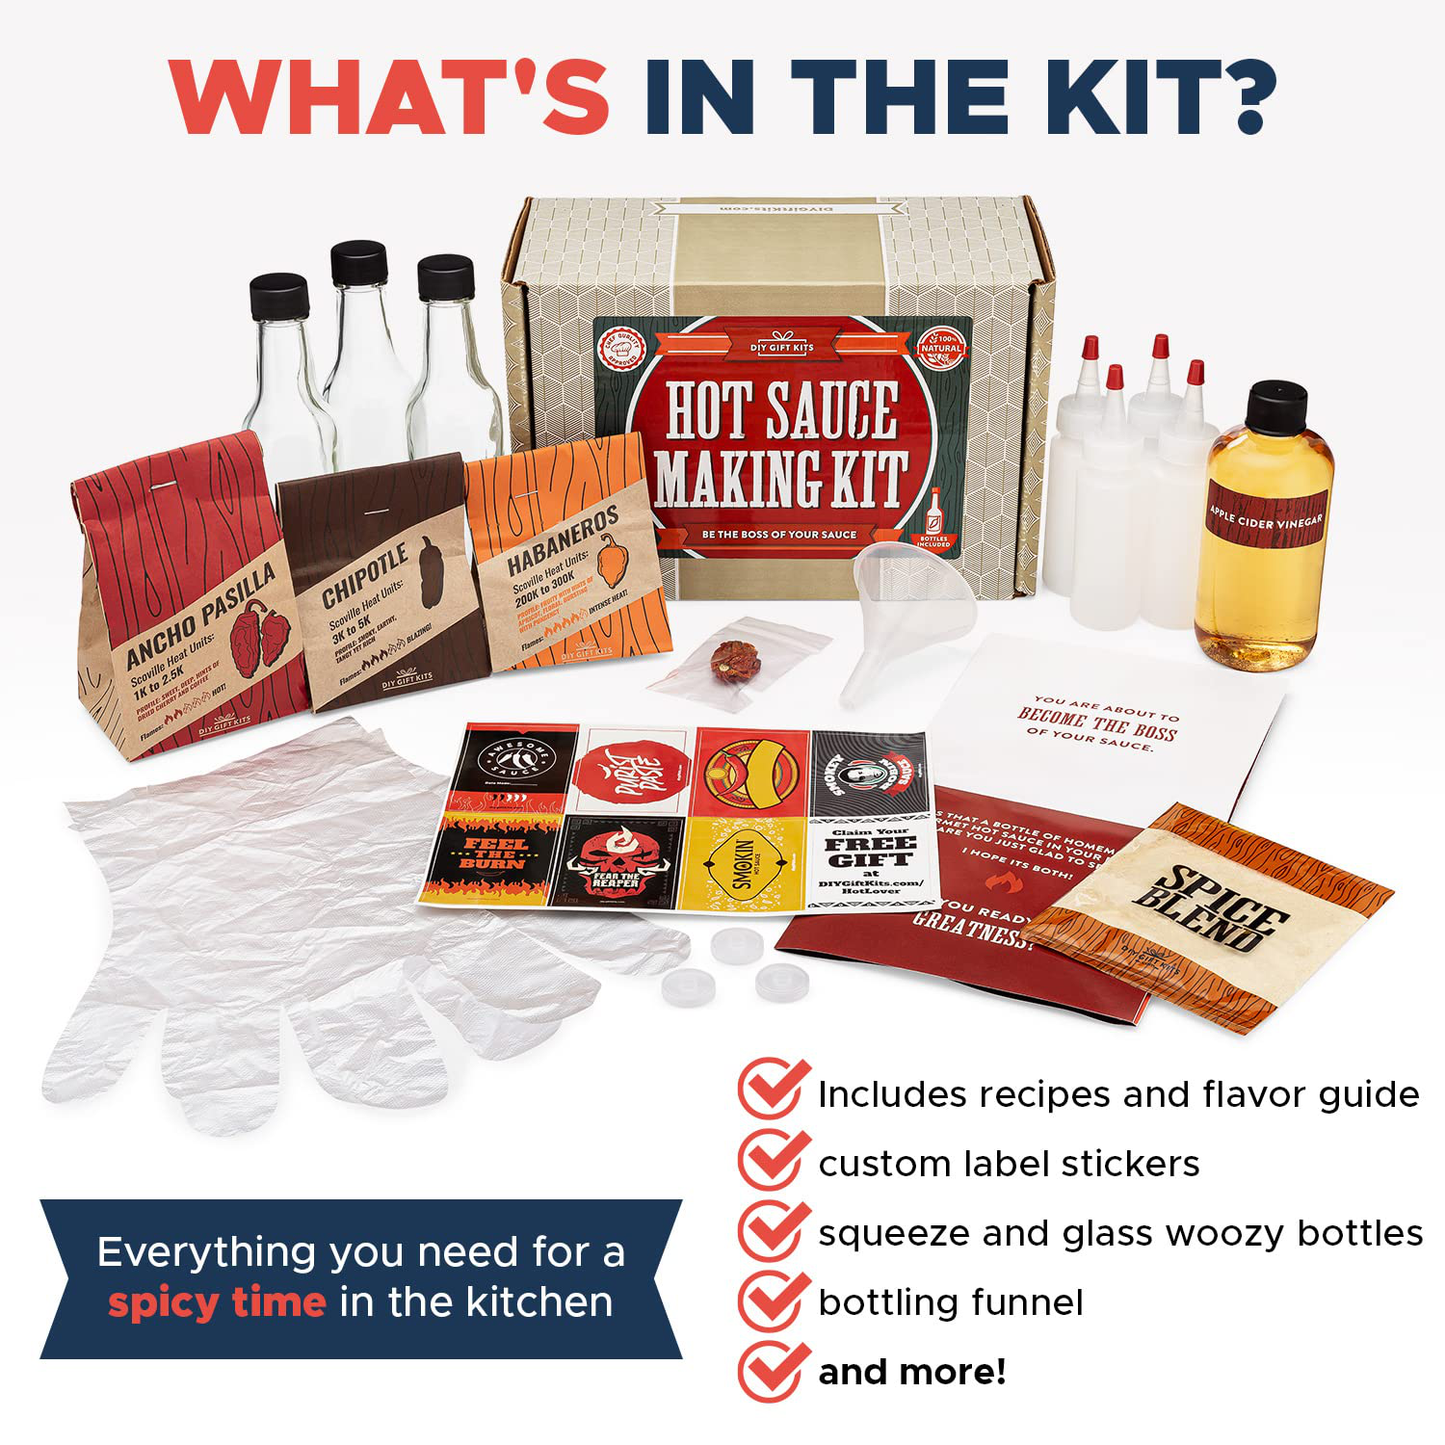 DIY Gift Kits Hot Sauce Making Kit, 26 Piece Set, Gourmet Spicy Gift Set for Men, Featuring 5Th Generation Heirloom Peppers & Spice Blends, Natural & GMO Free, Recipe Book, Storing Bottles